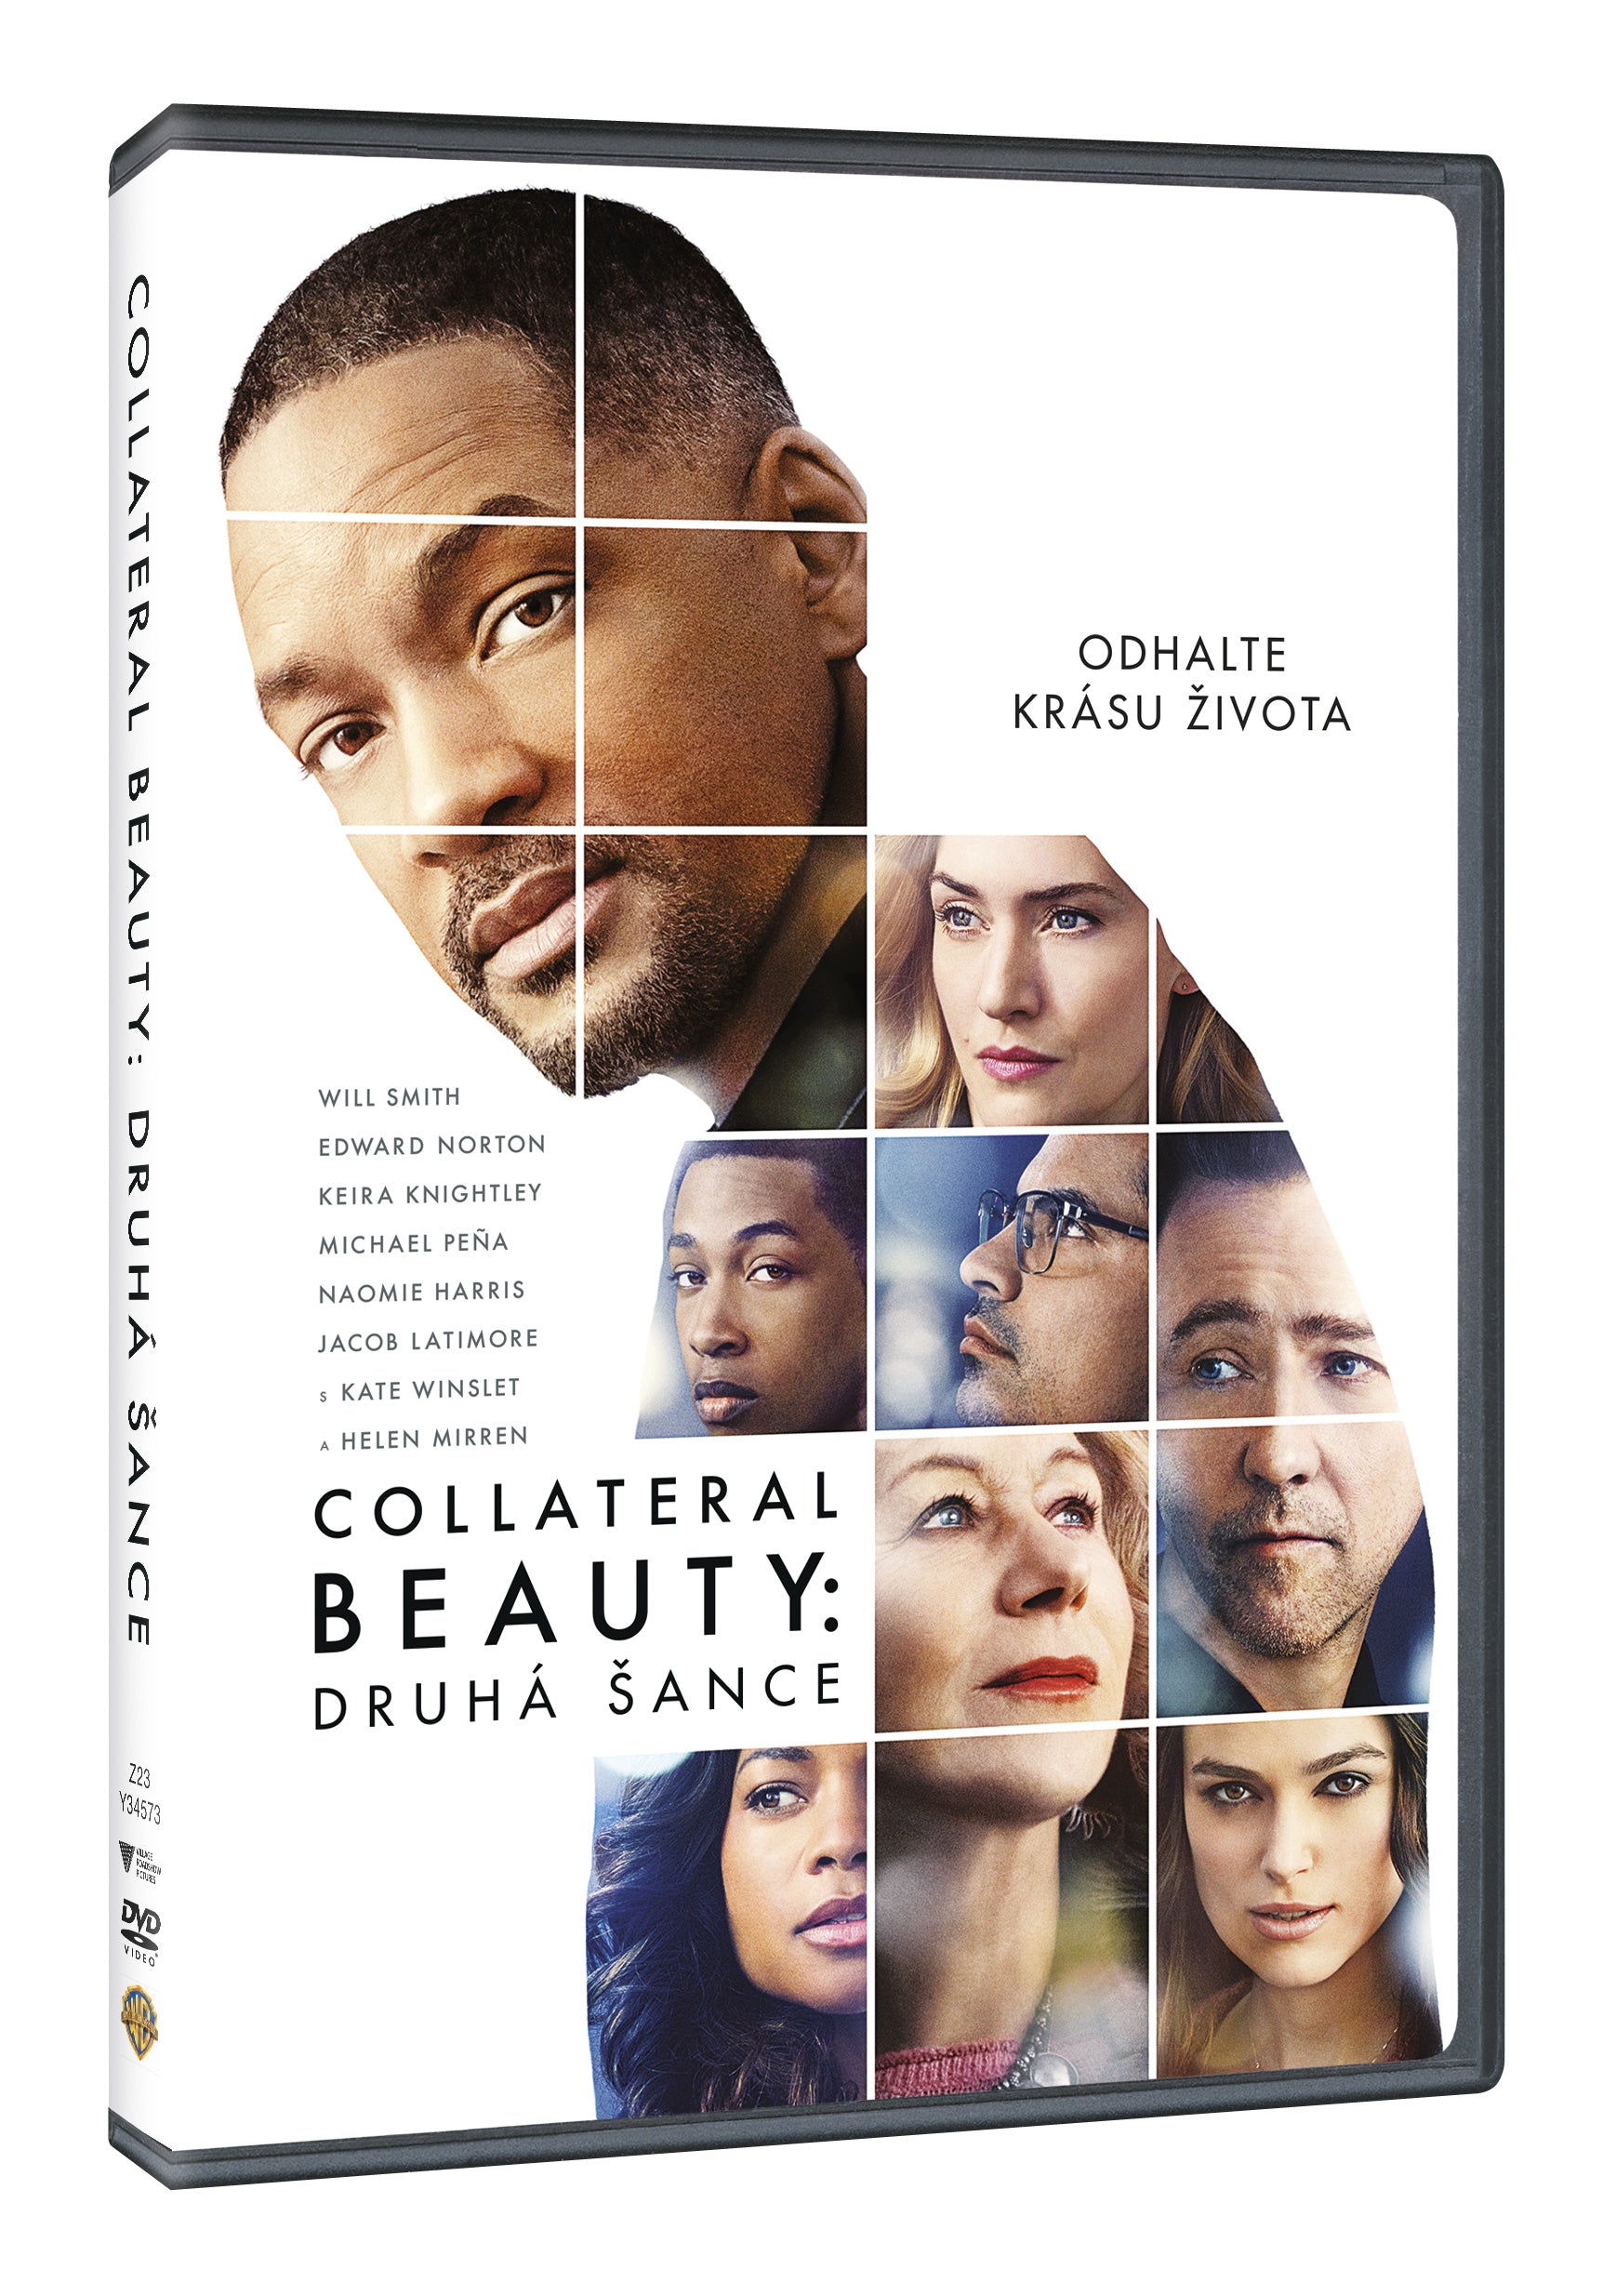 Collateral Beauty: Druha sance DVD / Collateral Beauty